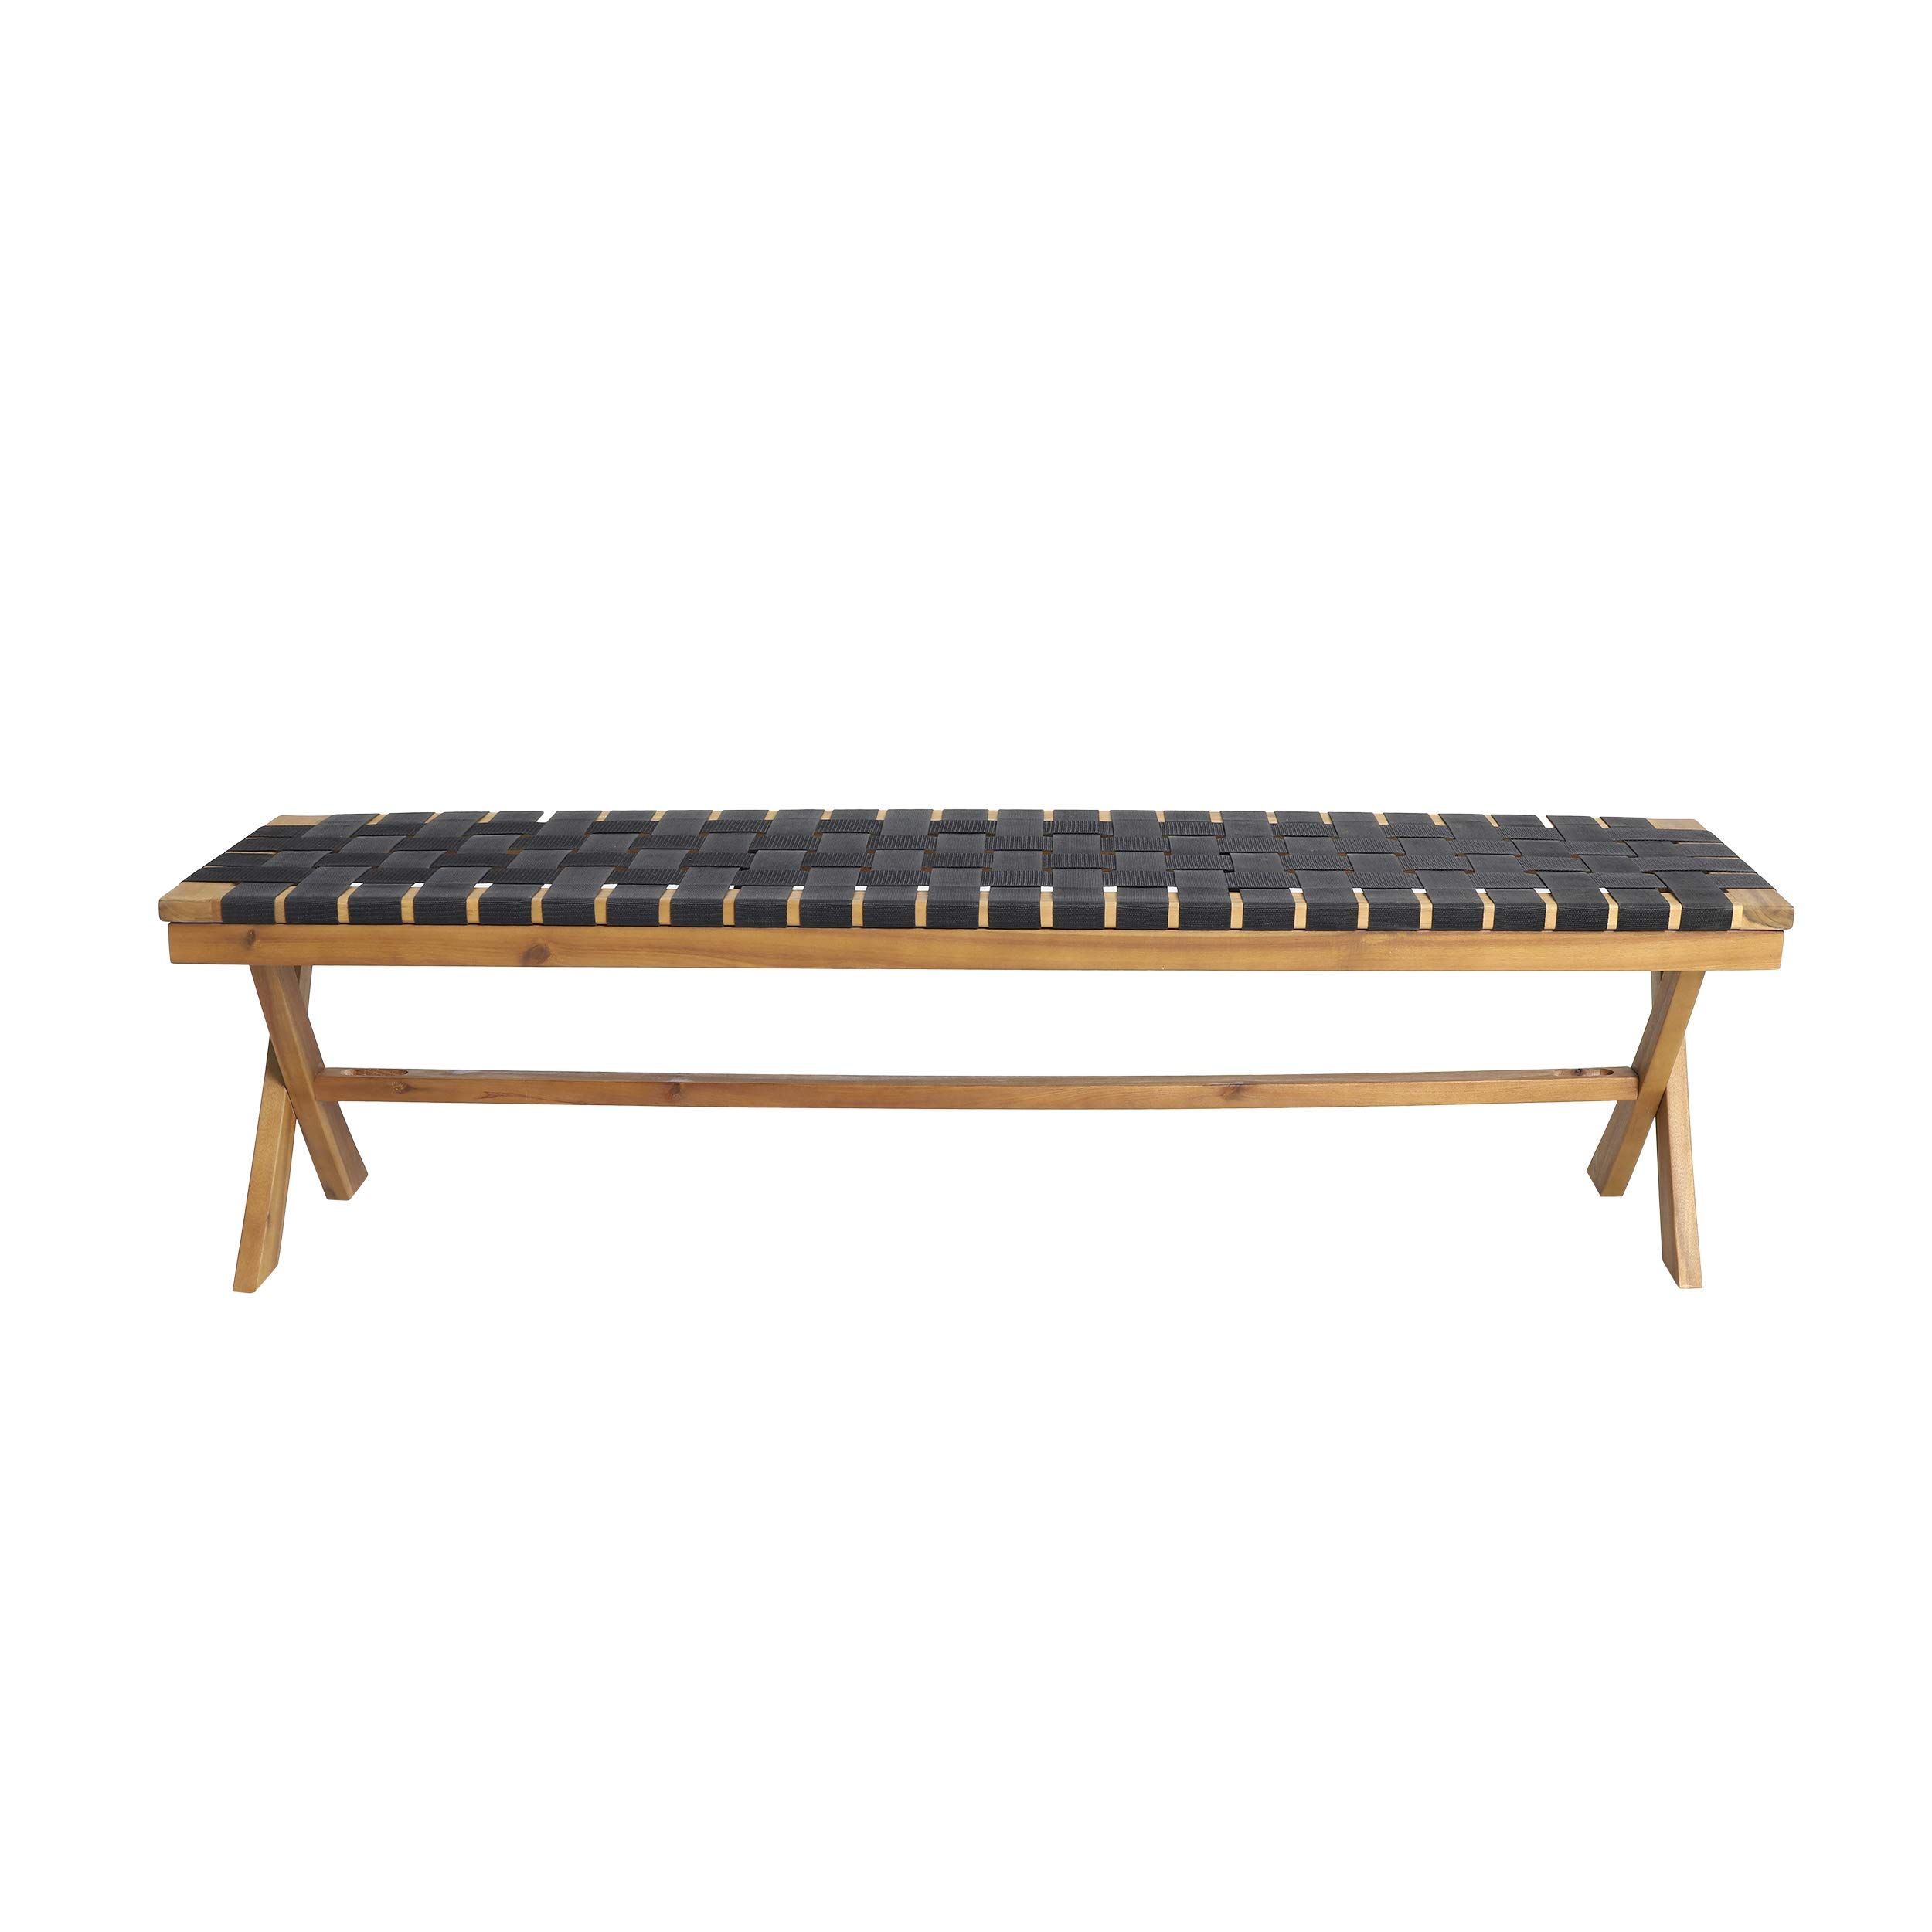 Jeffery Outdoor Acacia Wood Bench with Rope Seating, Black and Teak | Amazon (US)